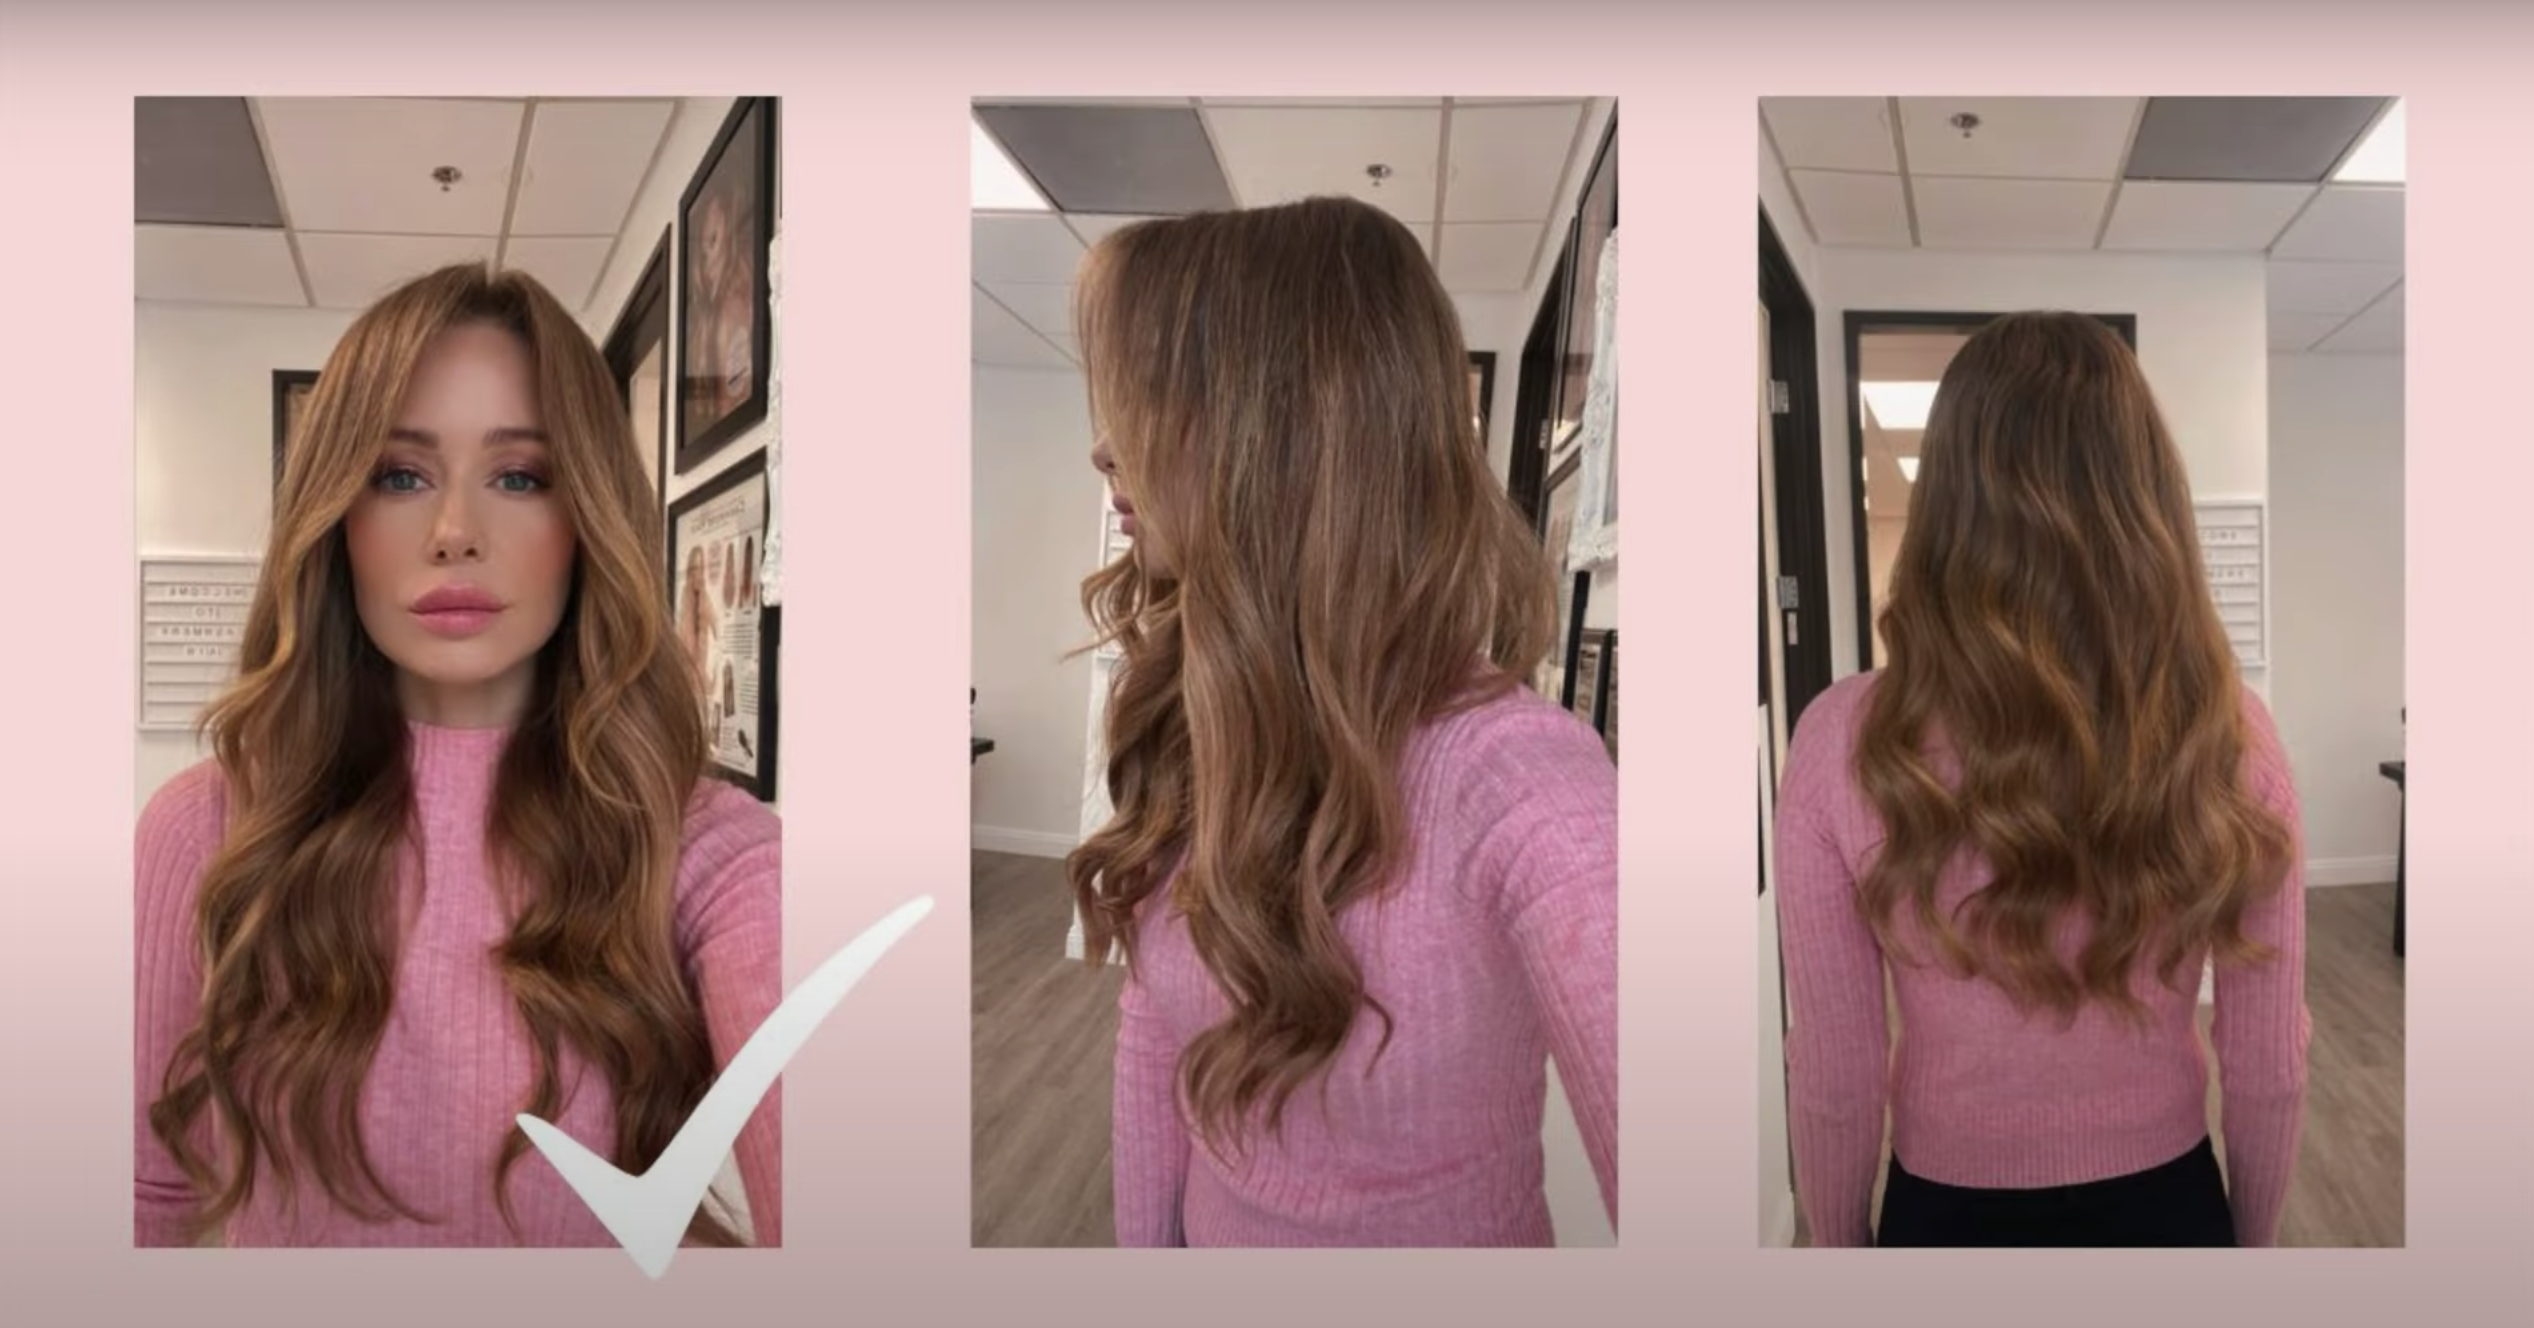 3 angles of woman showing hair color